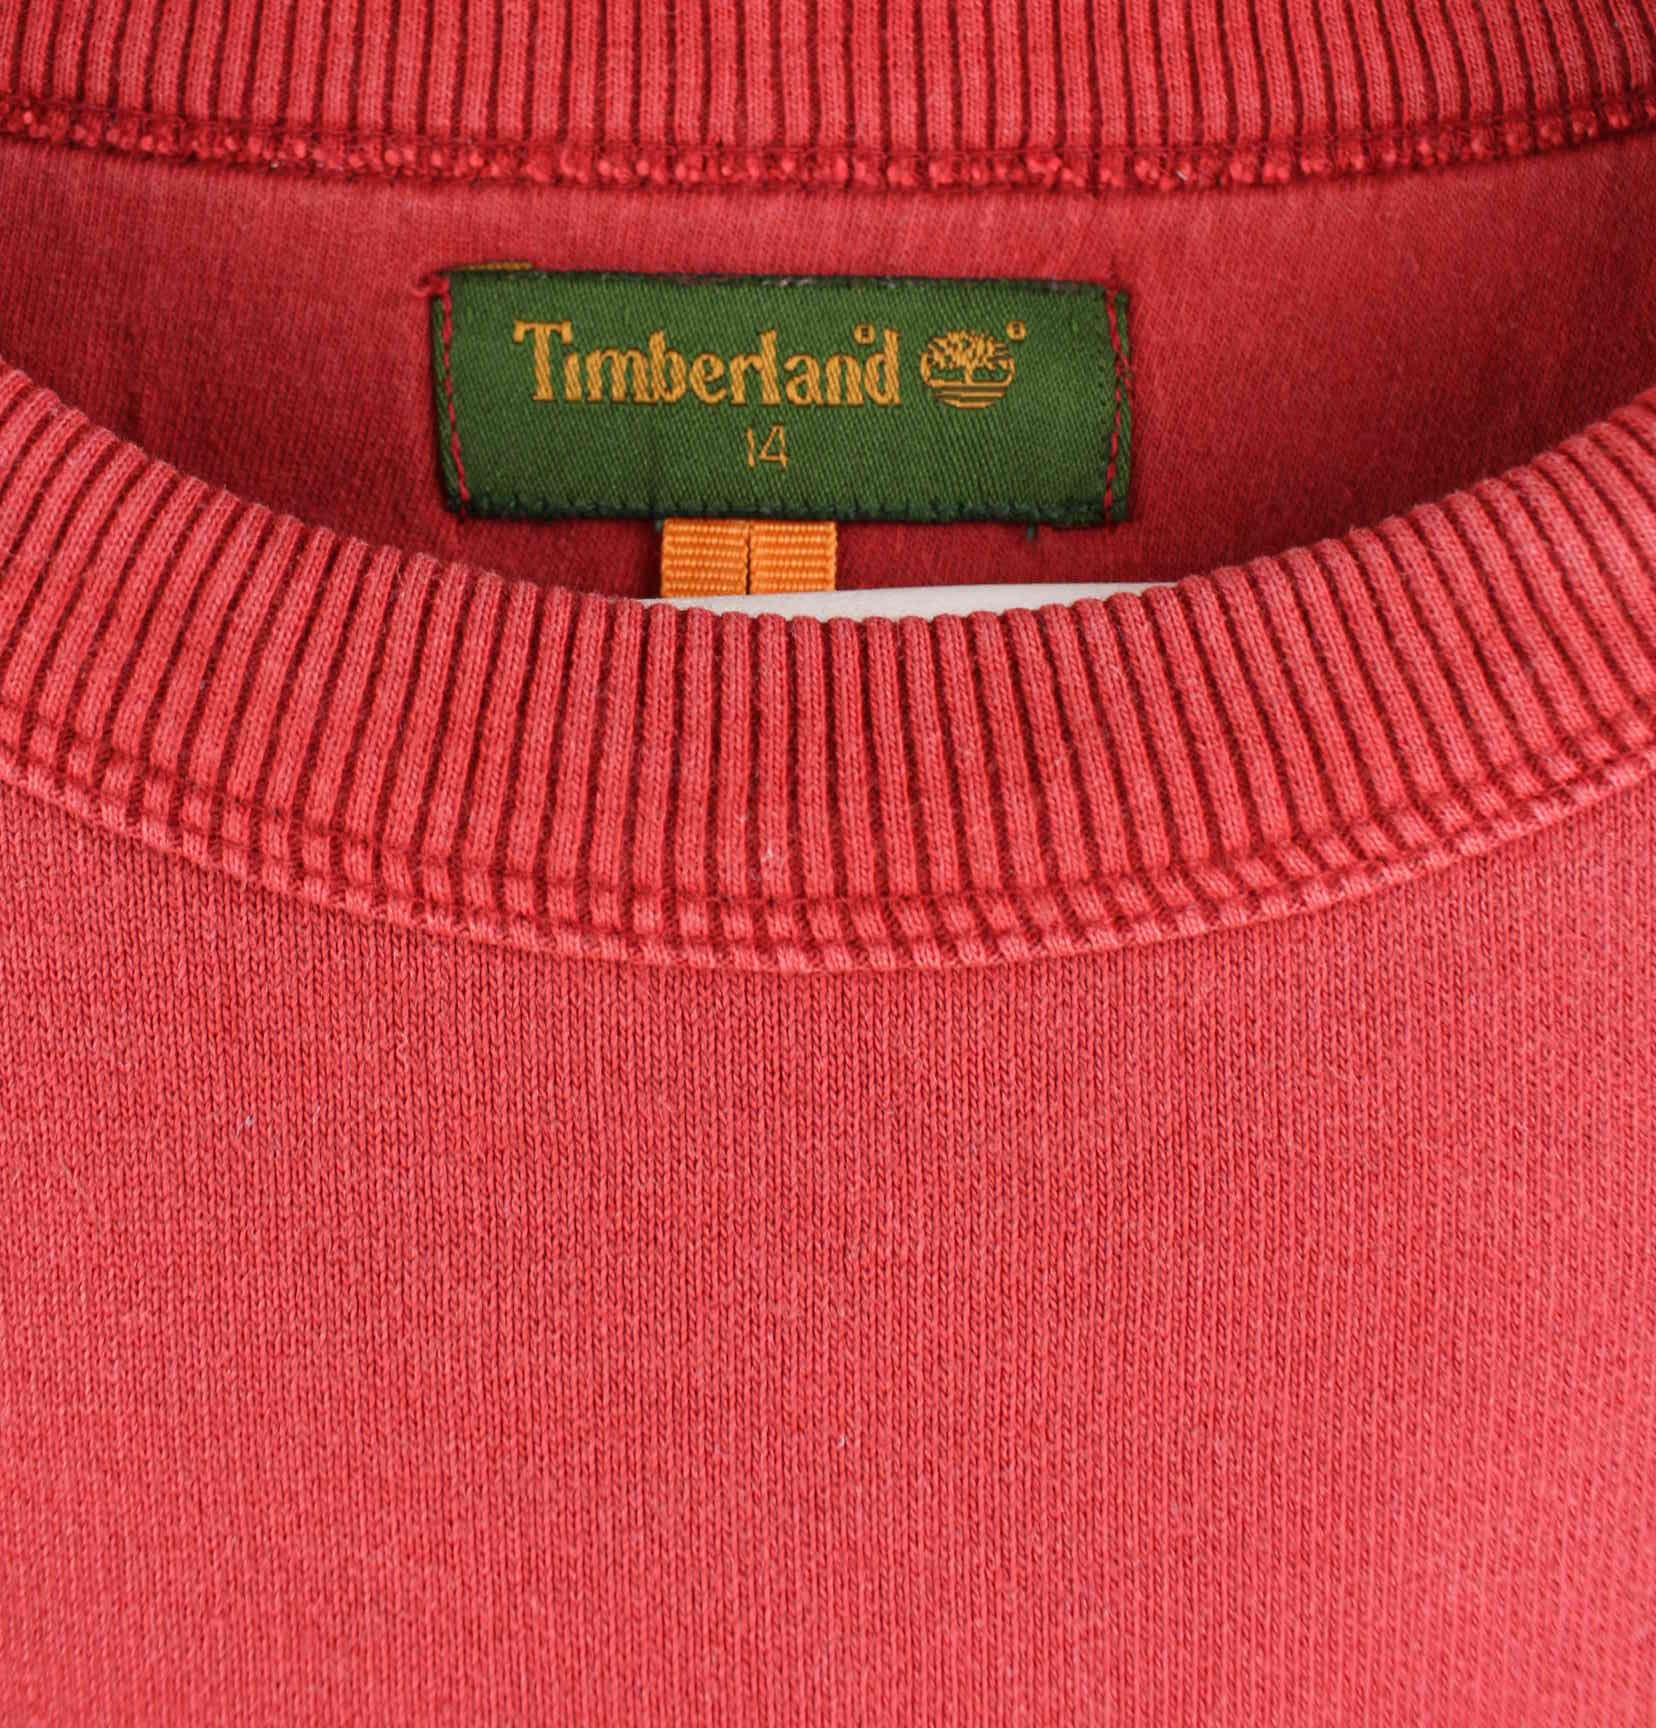 Timberland y2k Print Sweater Rot S (detail image 2)